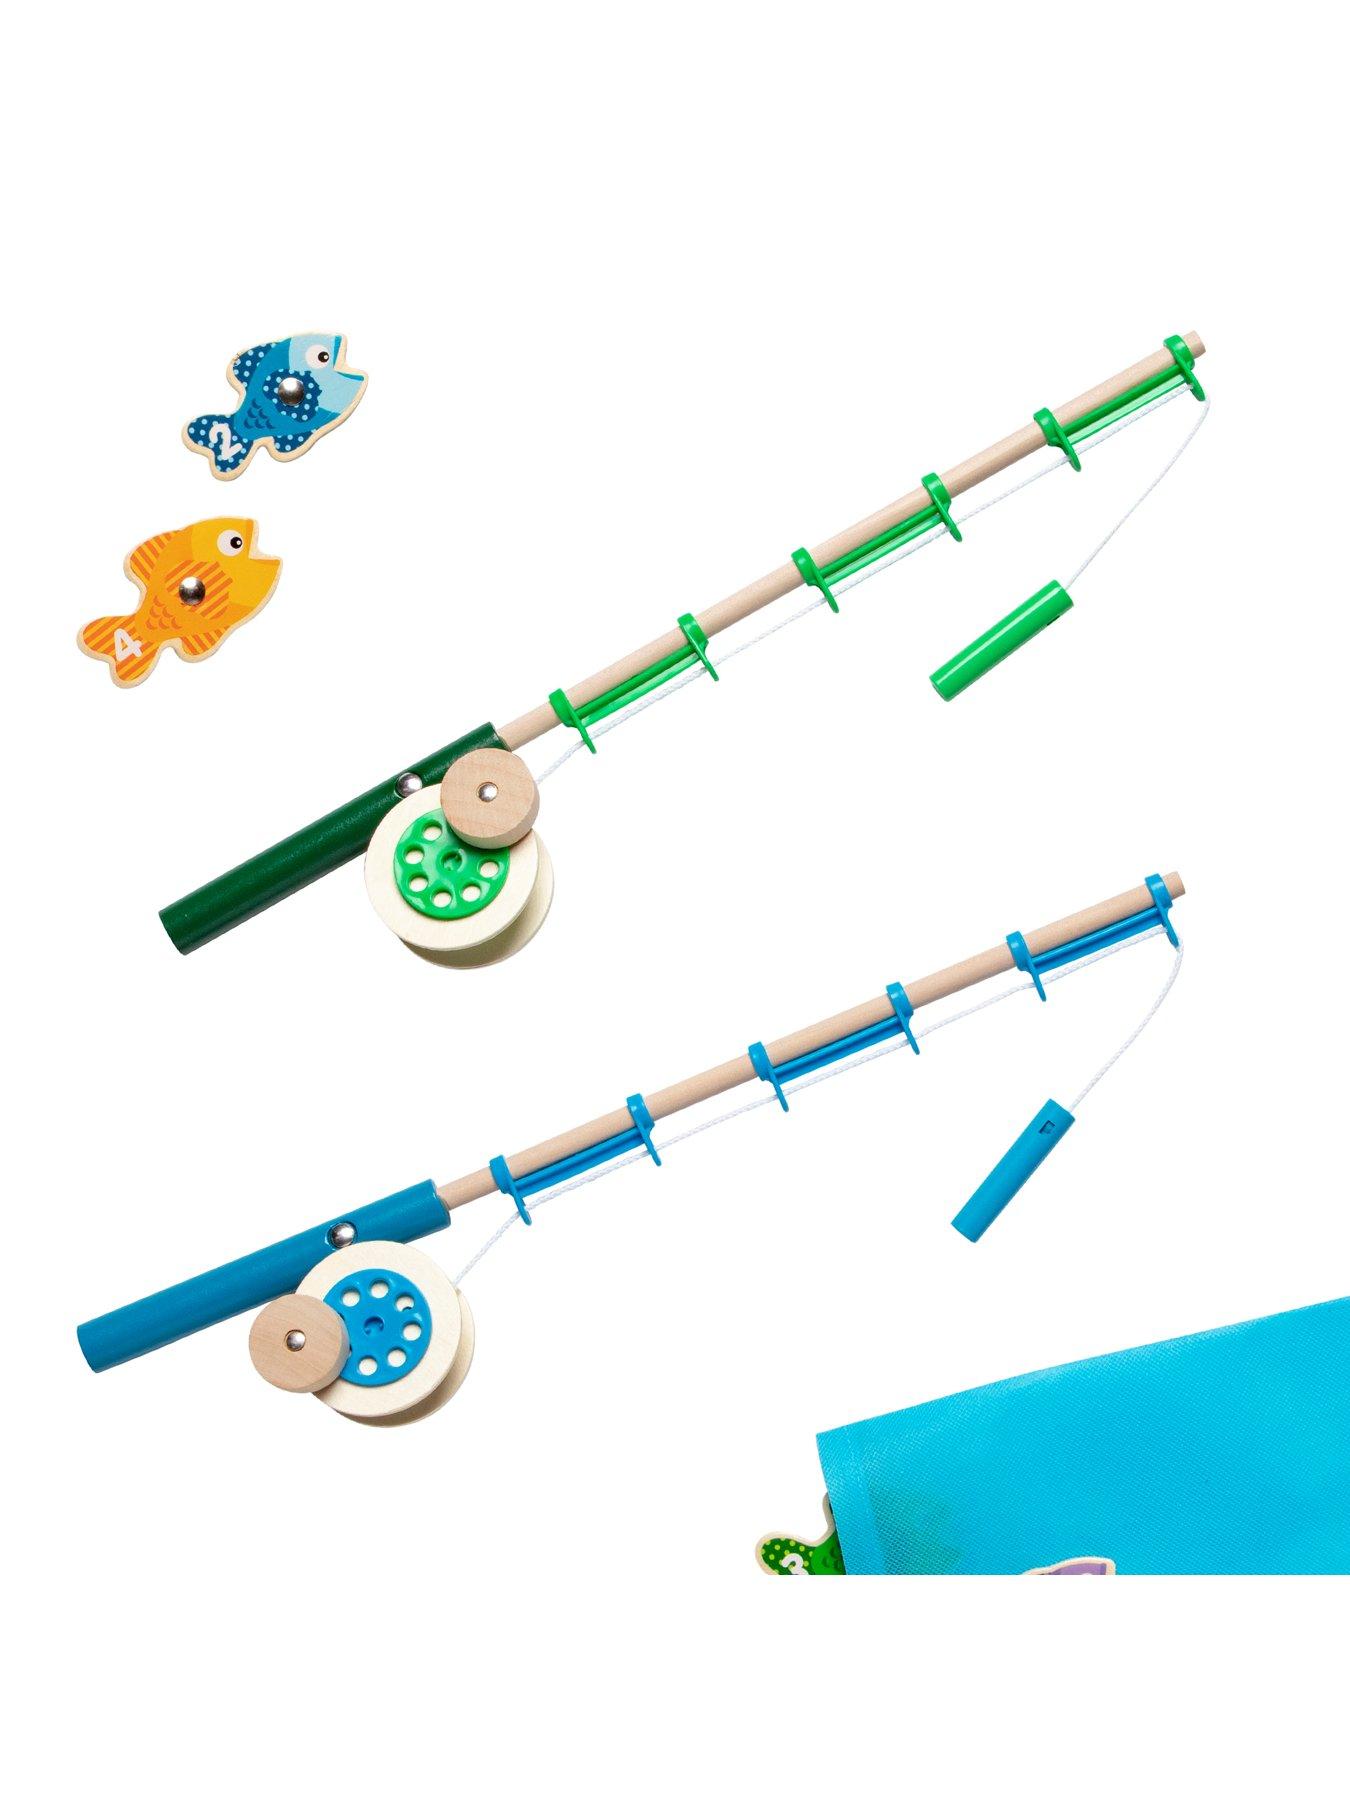 Melissa & Doug Magnetic Wooden Fishing Game With Magnetic Fishing Pole 